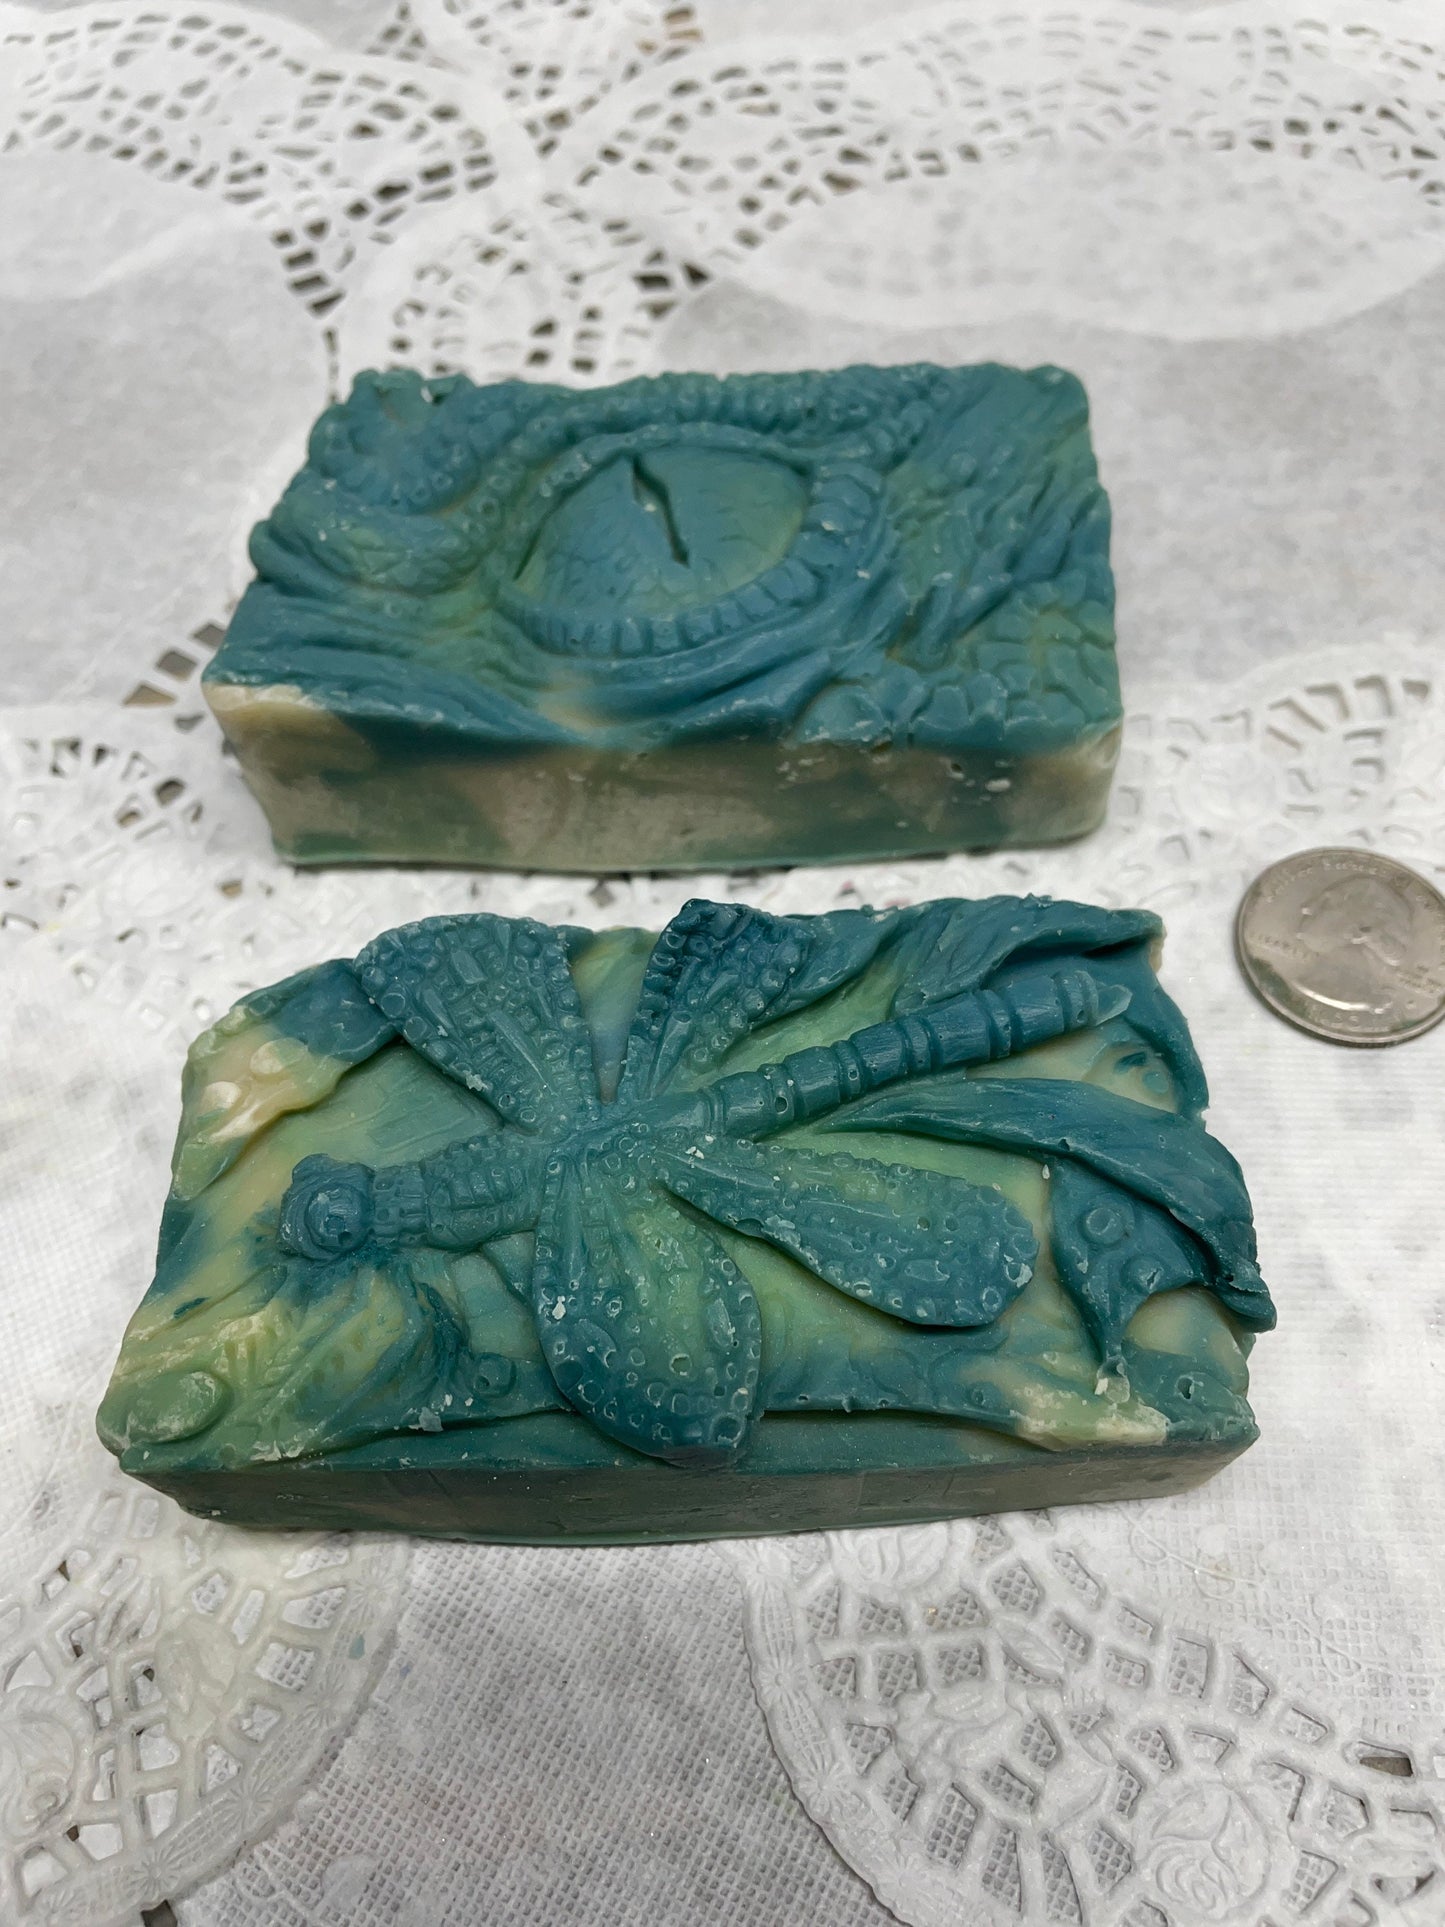 A photo of Dragon Eye and Dragonfly Aloe Vera and Cucumber Soap side by side